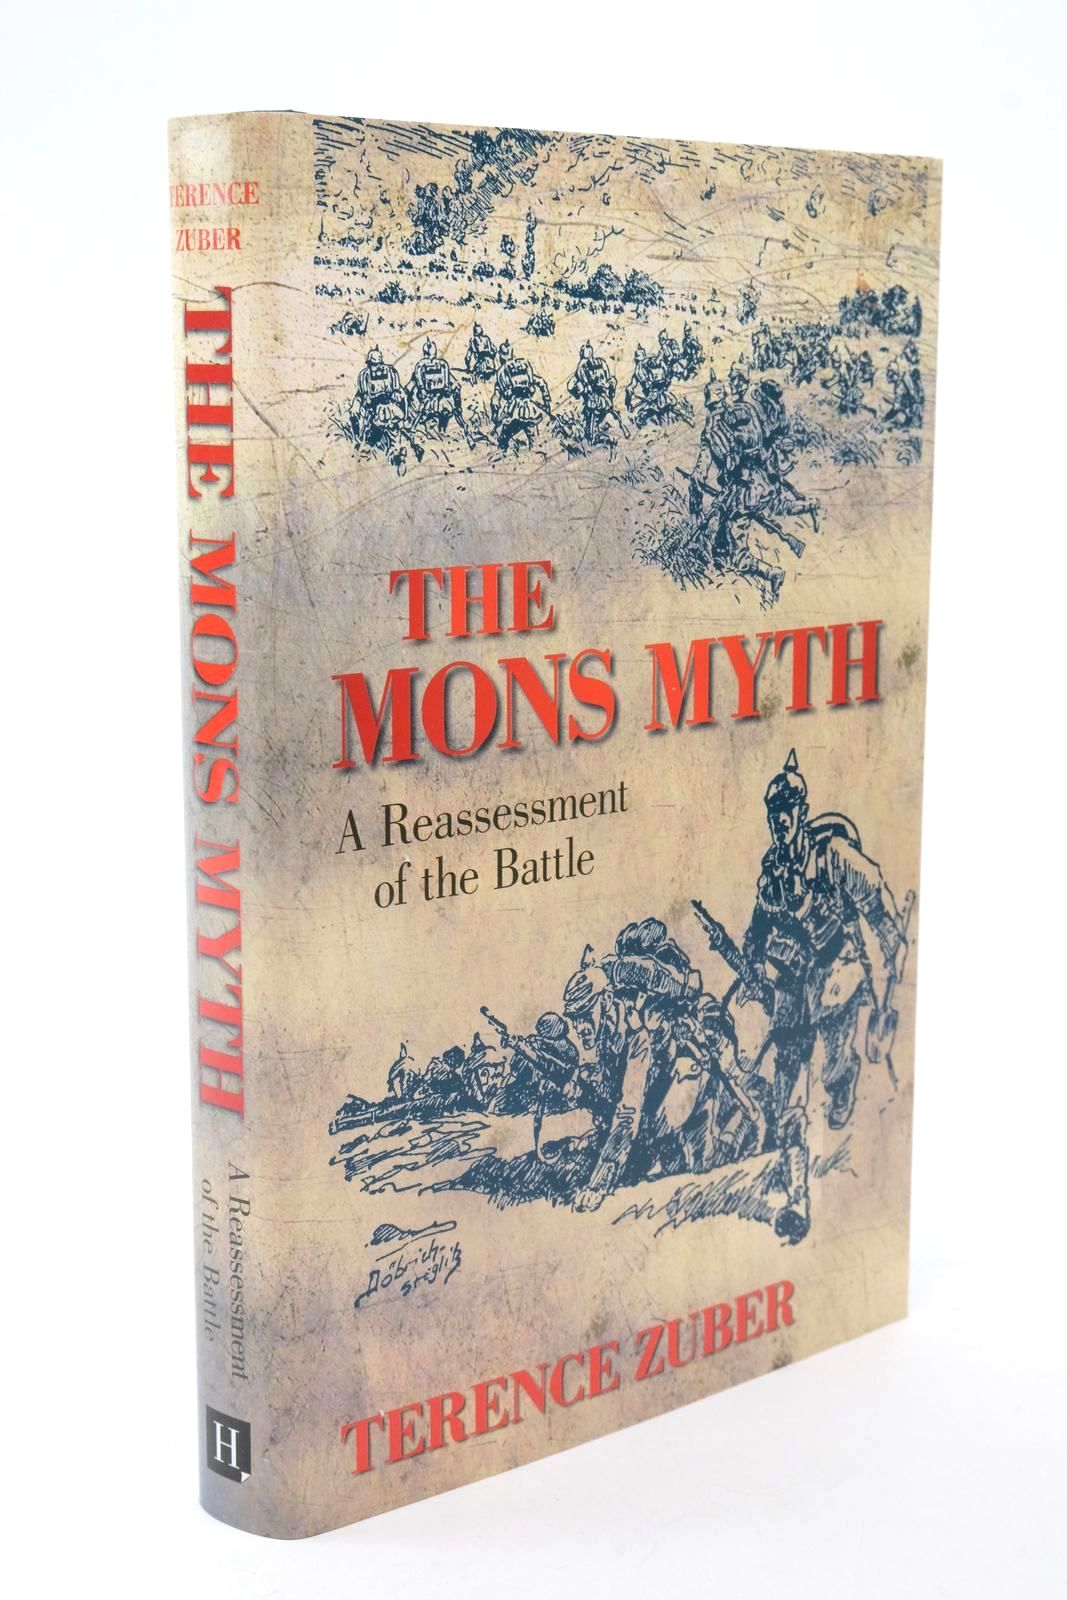 Photo of THE MONS MYTH - A REASSESSMENT OF THE BATTLE written by Zuber, Terence published by The History Press (STOCK CODE: 1322600)  for sale by Stella & Rose's Books